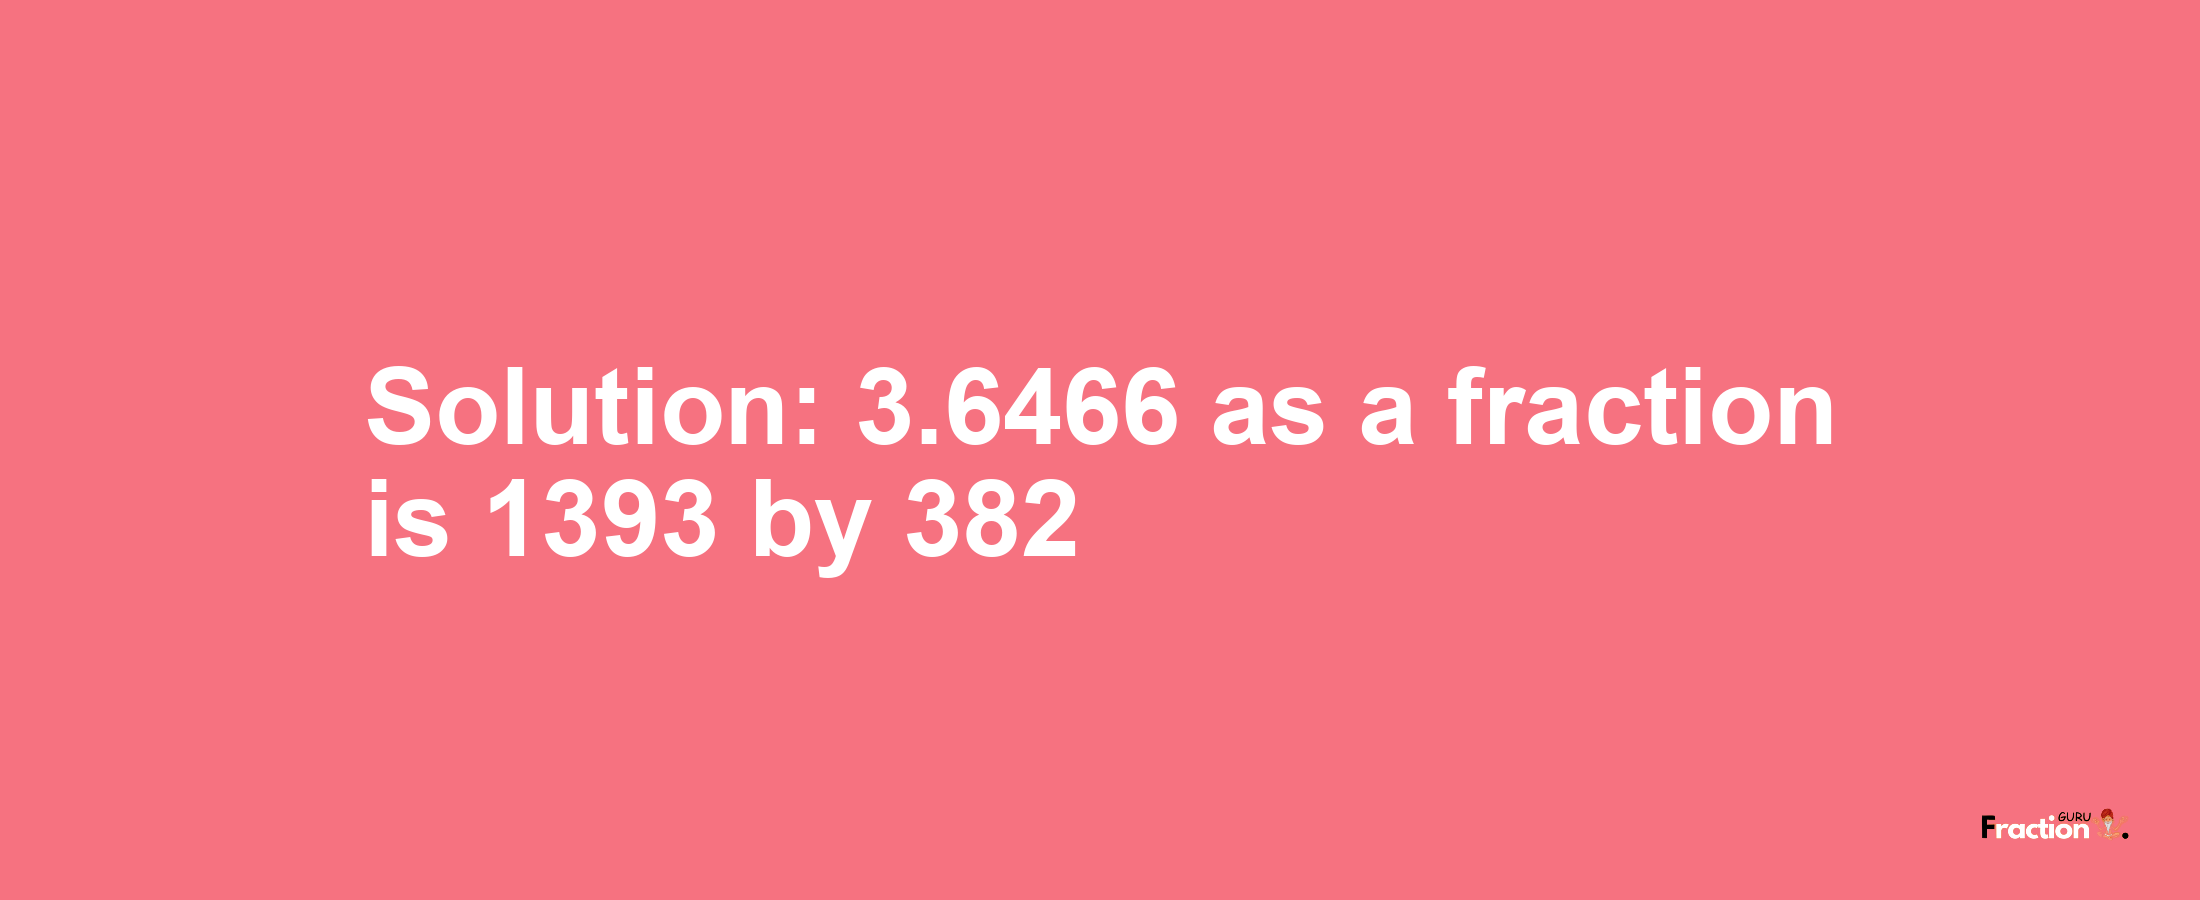 Solution:3.6466 as a fraction is 1393/382